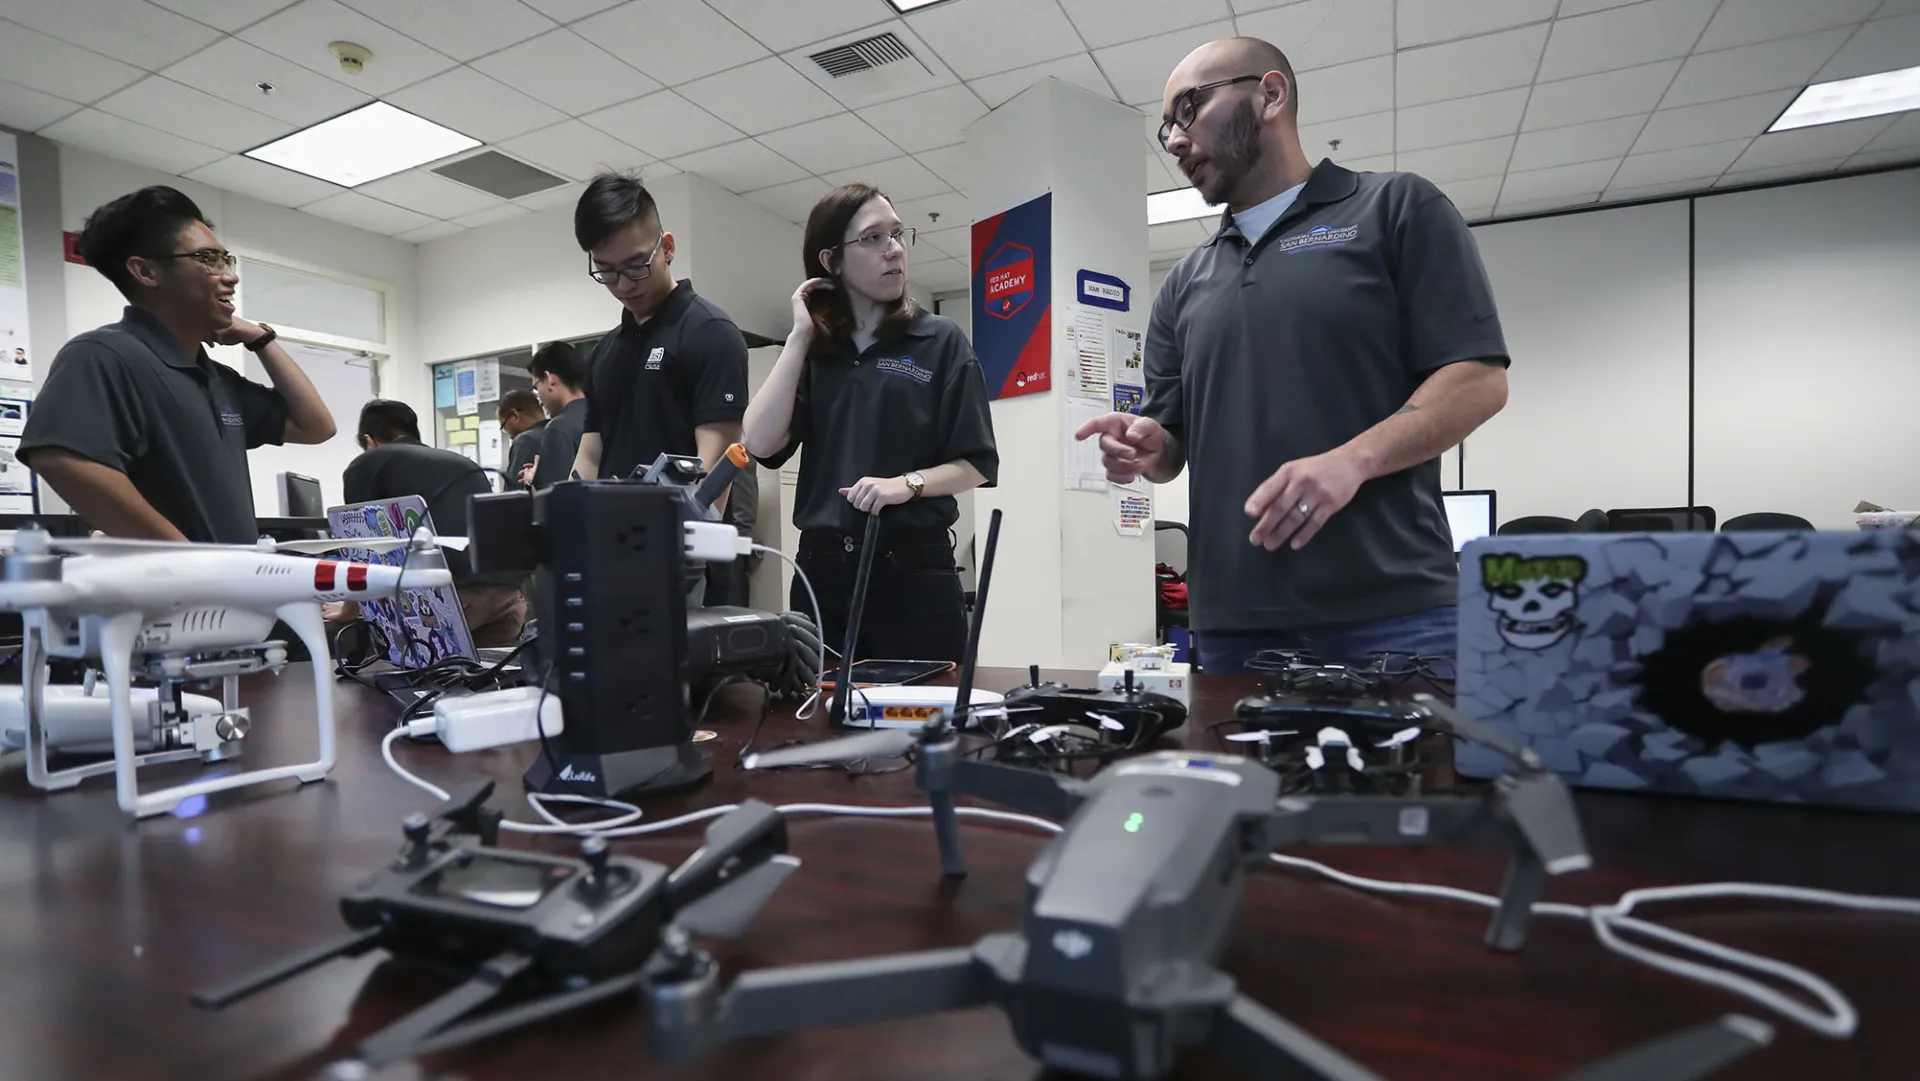 CSUSB students in the university’s Cybersecurity Center working with drones.